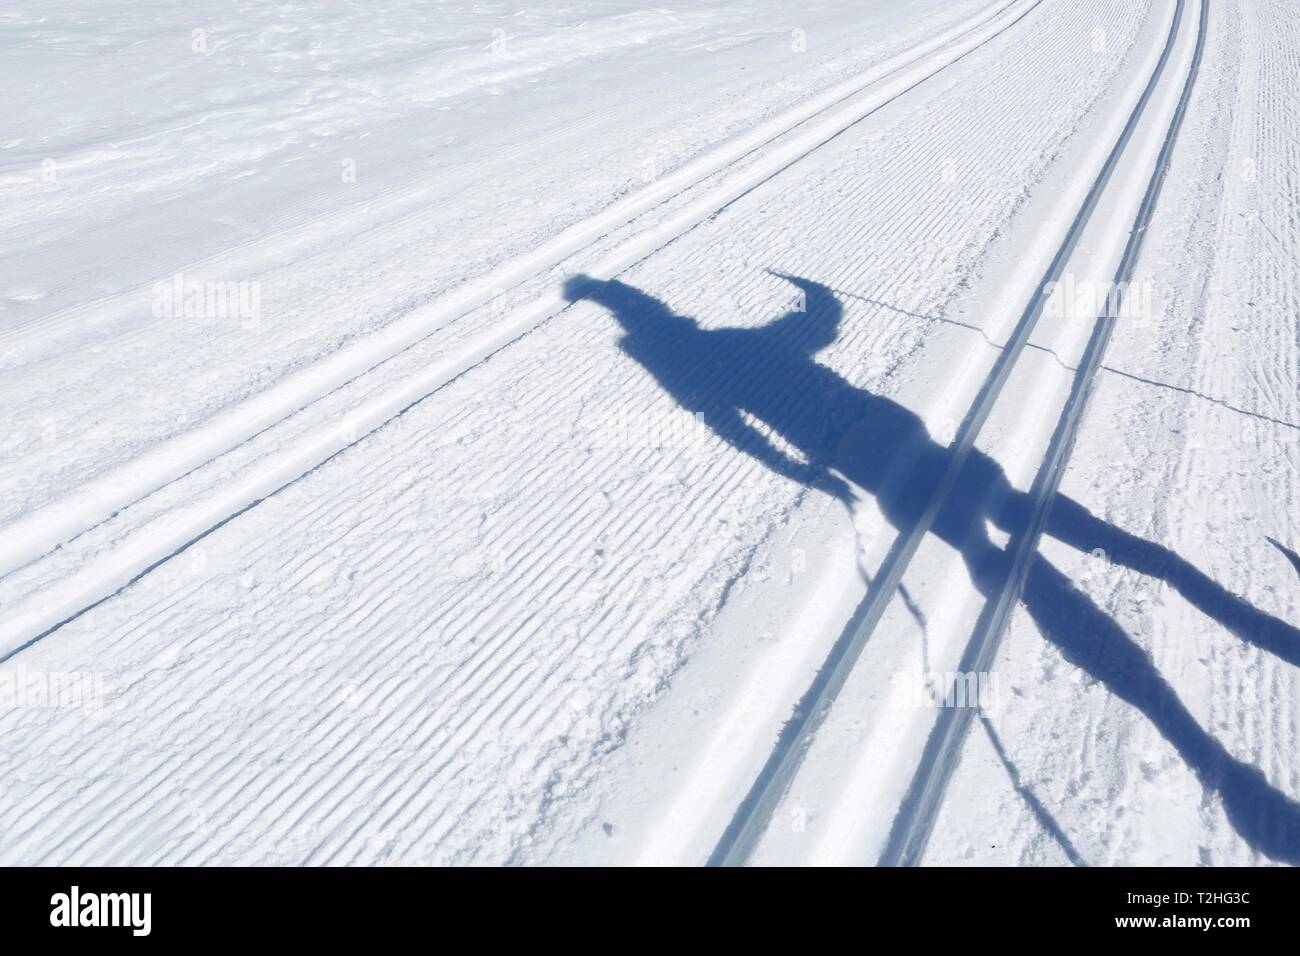 Shadow of a cross-country skier on a cross-country track, cross-country skiing, San Martino di Castrozza, Trento, Italy Stock Photo